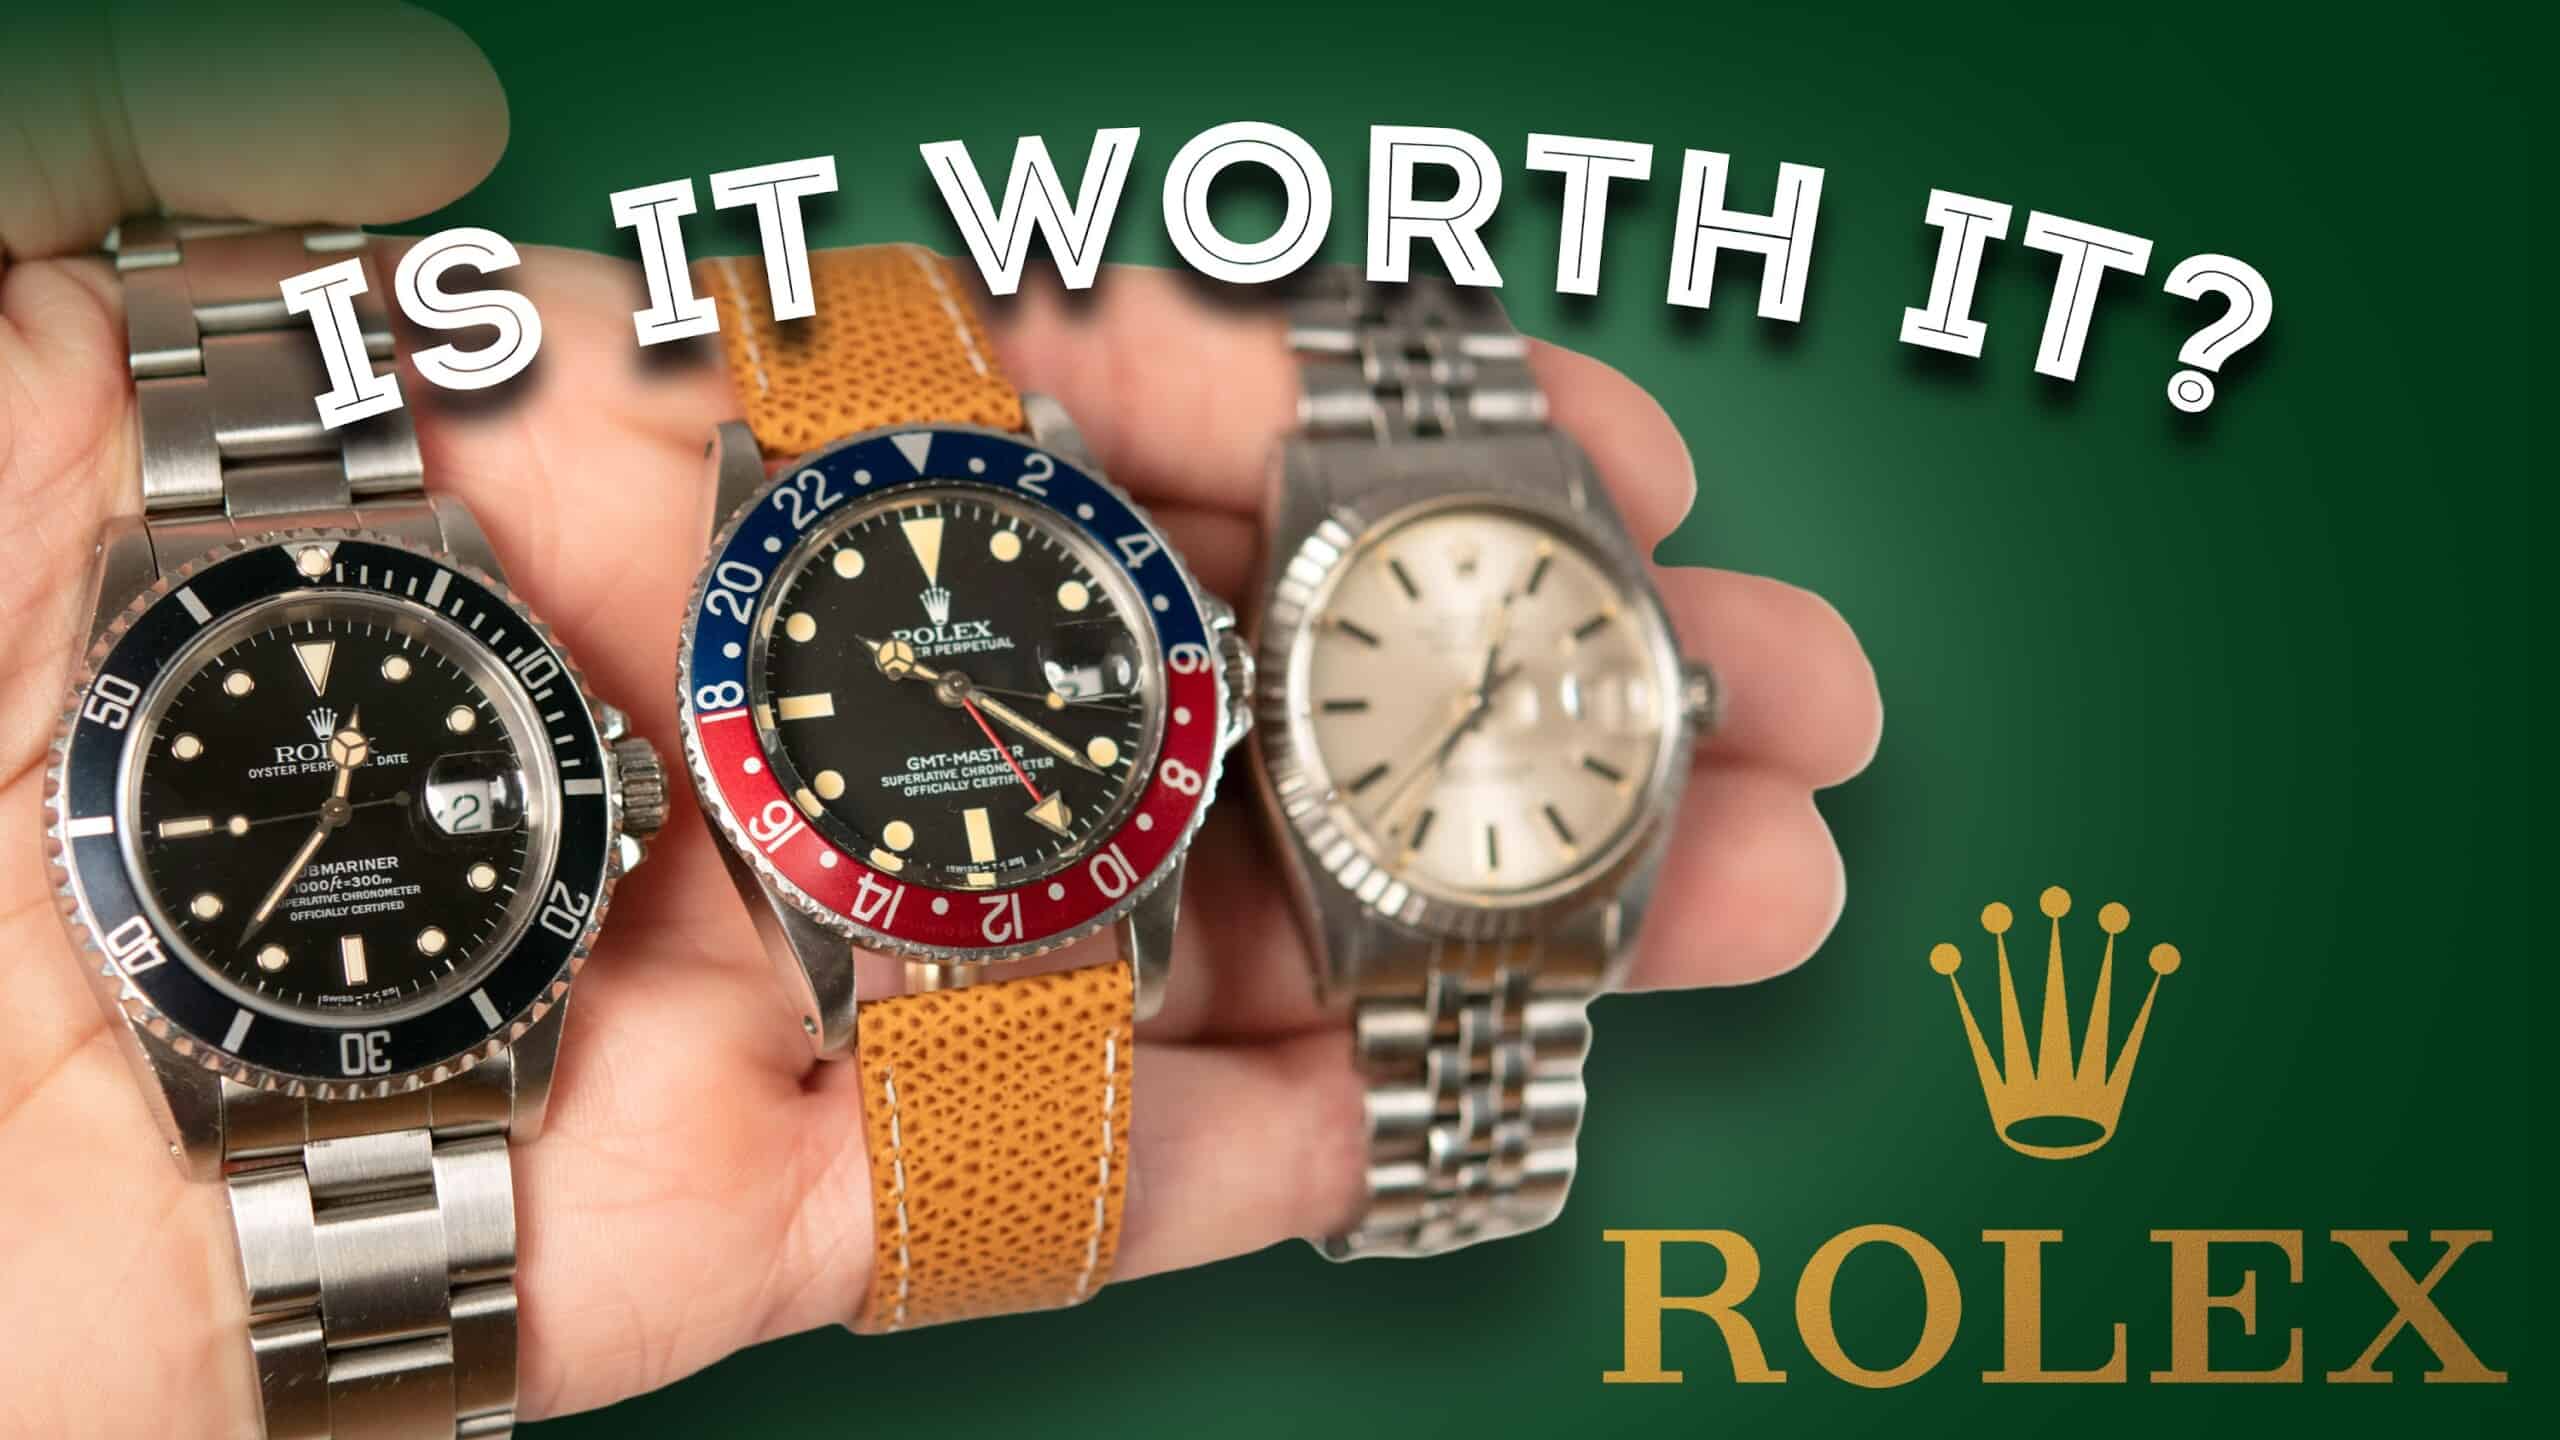 Rolex Watches: Are They Worth It? Men's Watch Review - Datejust